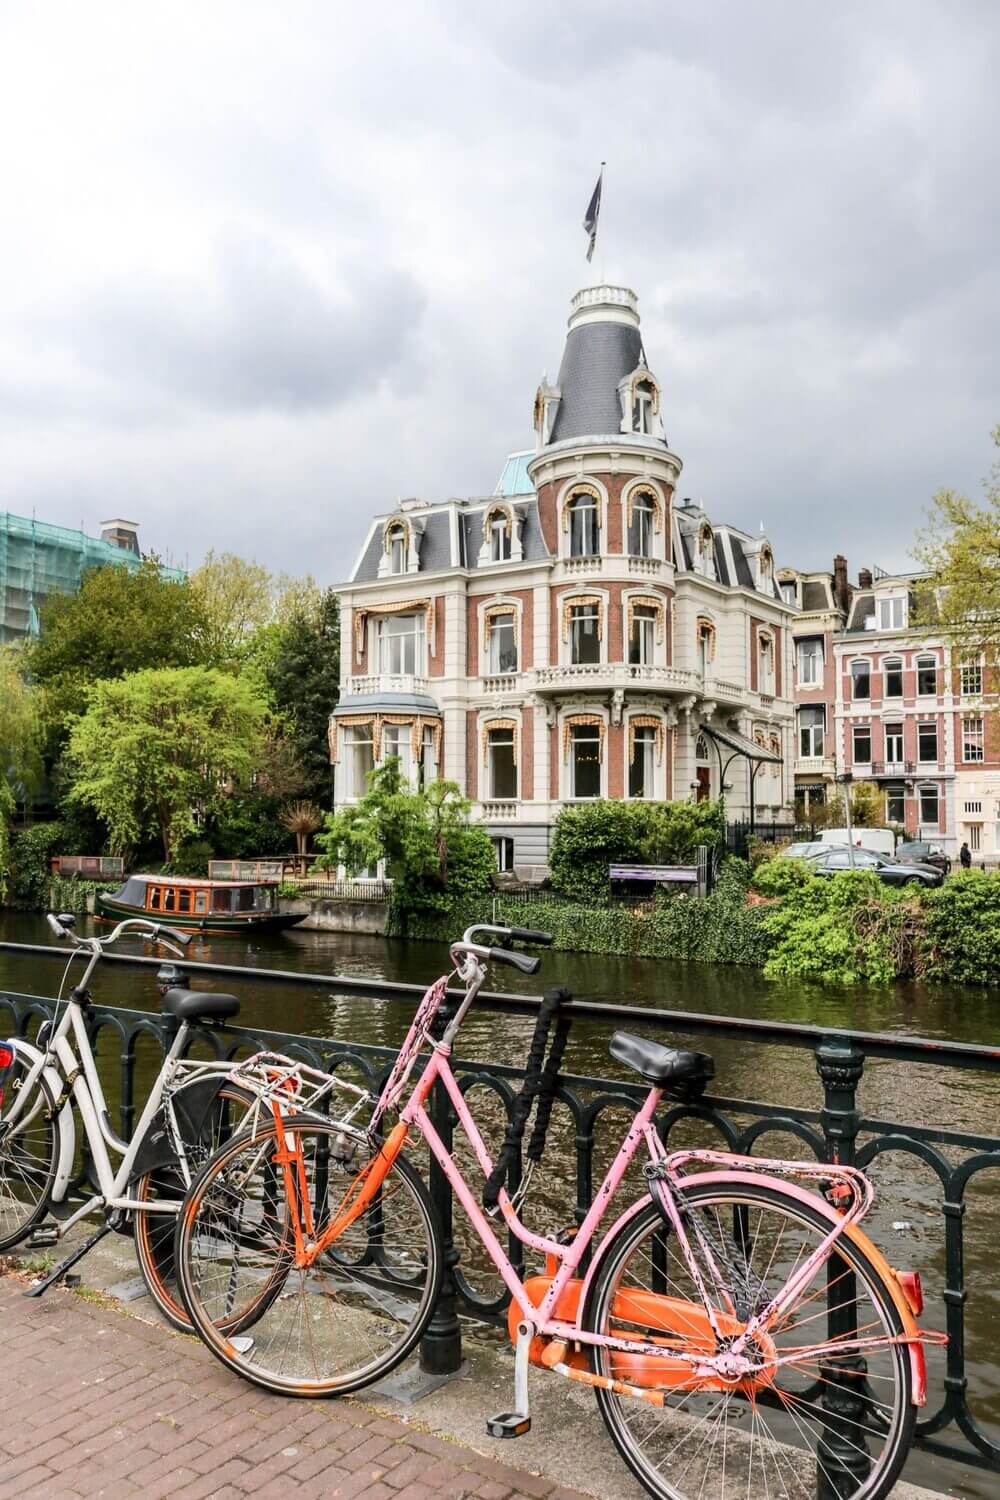 Two bikes, white and pink, lent against a black railing by the river. In the background beyond the river is a dutch style old house with turret and flag. 